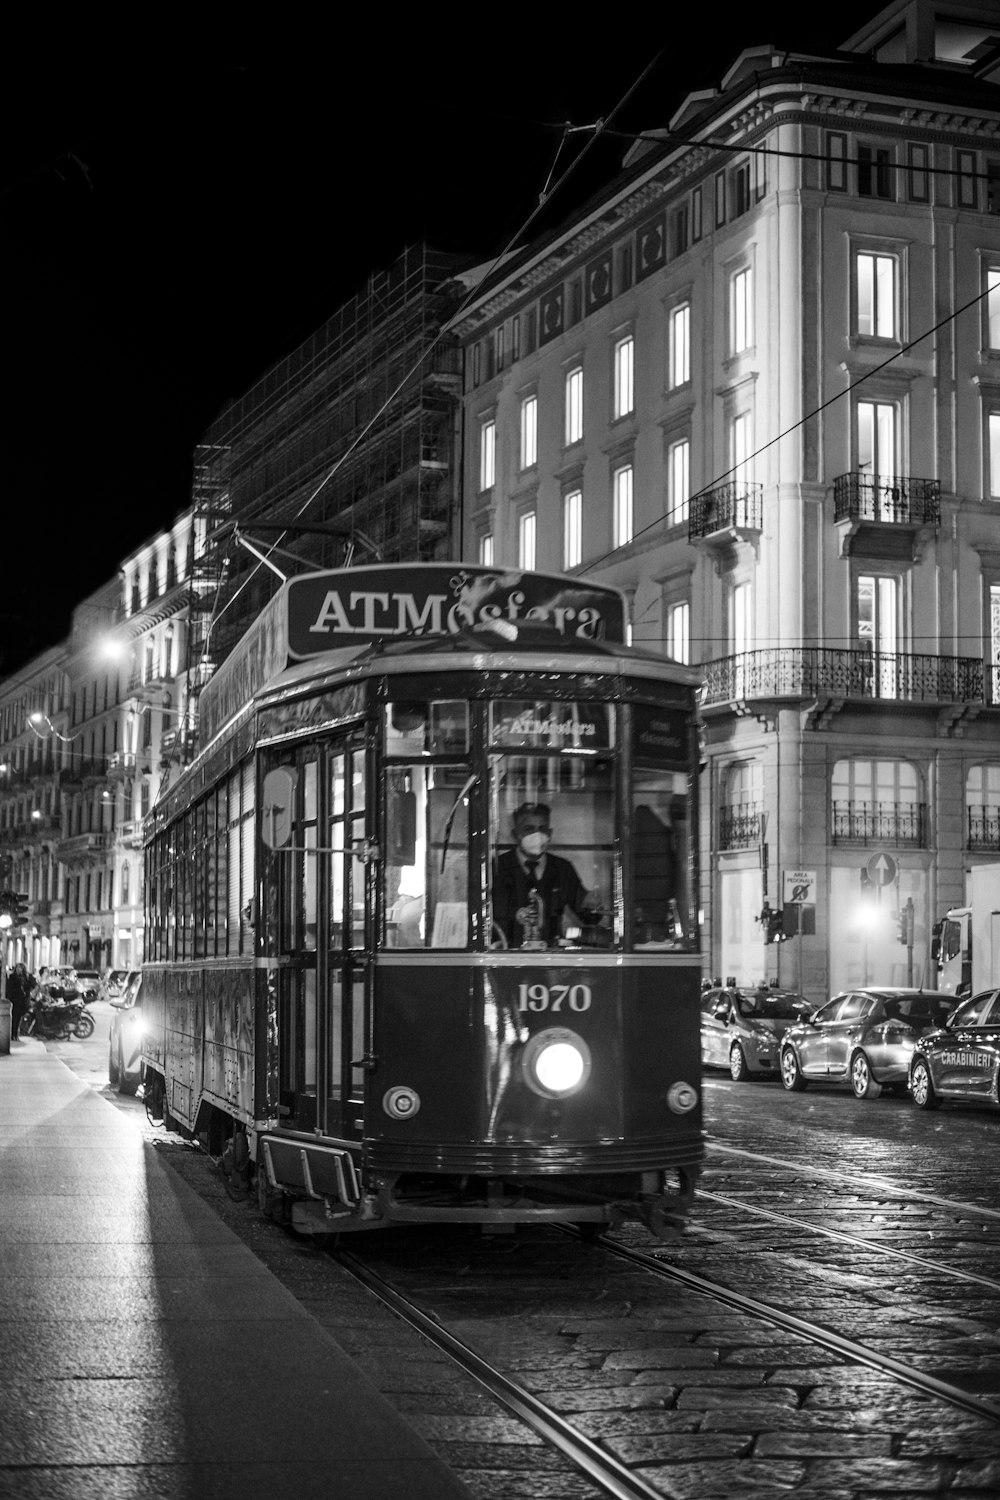 a black and white photo of a trolley on a city street